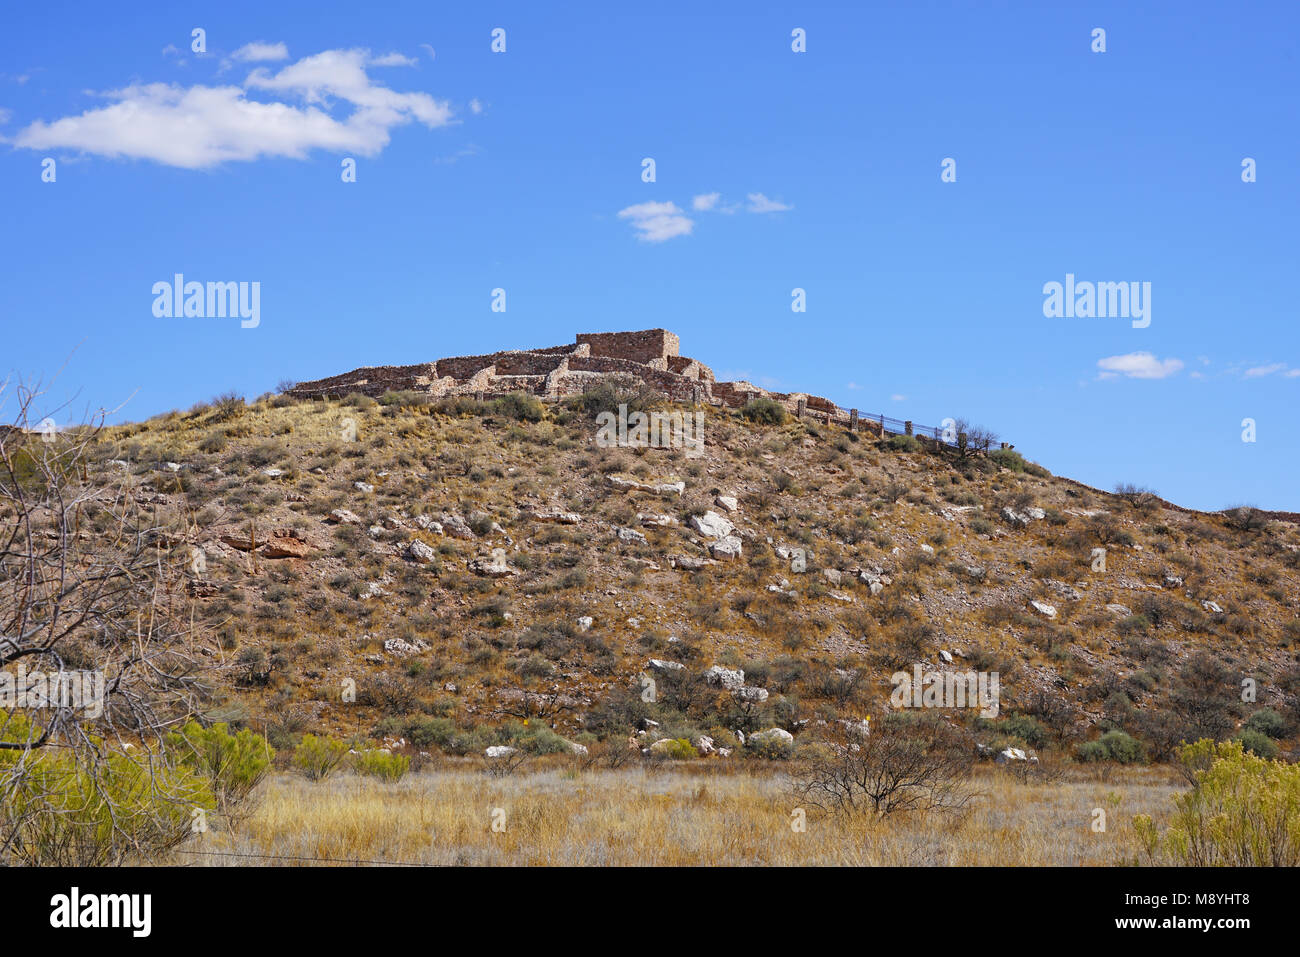 View of the Tuzigoot National Monument, a pueblo ruin on the National Register of Historic Places in Yavapai County, Arizona Stock Photo